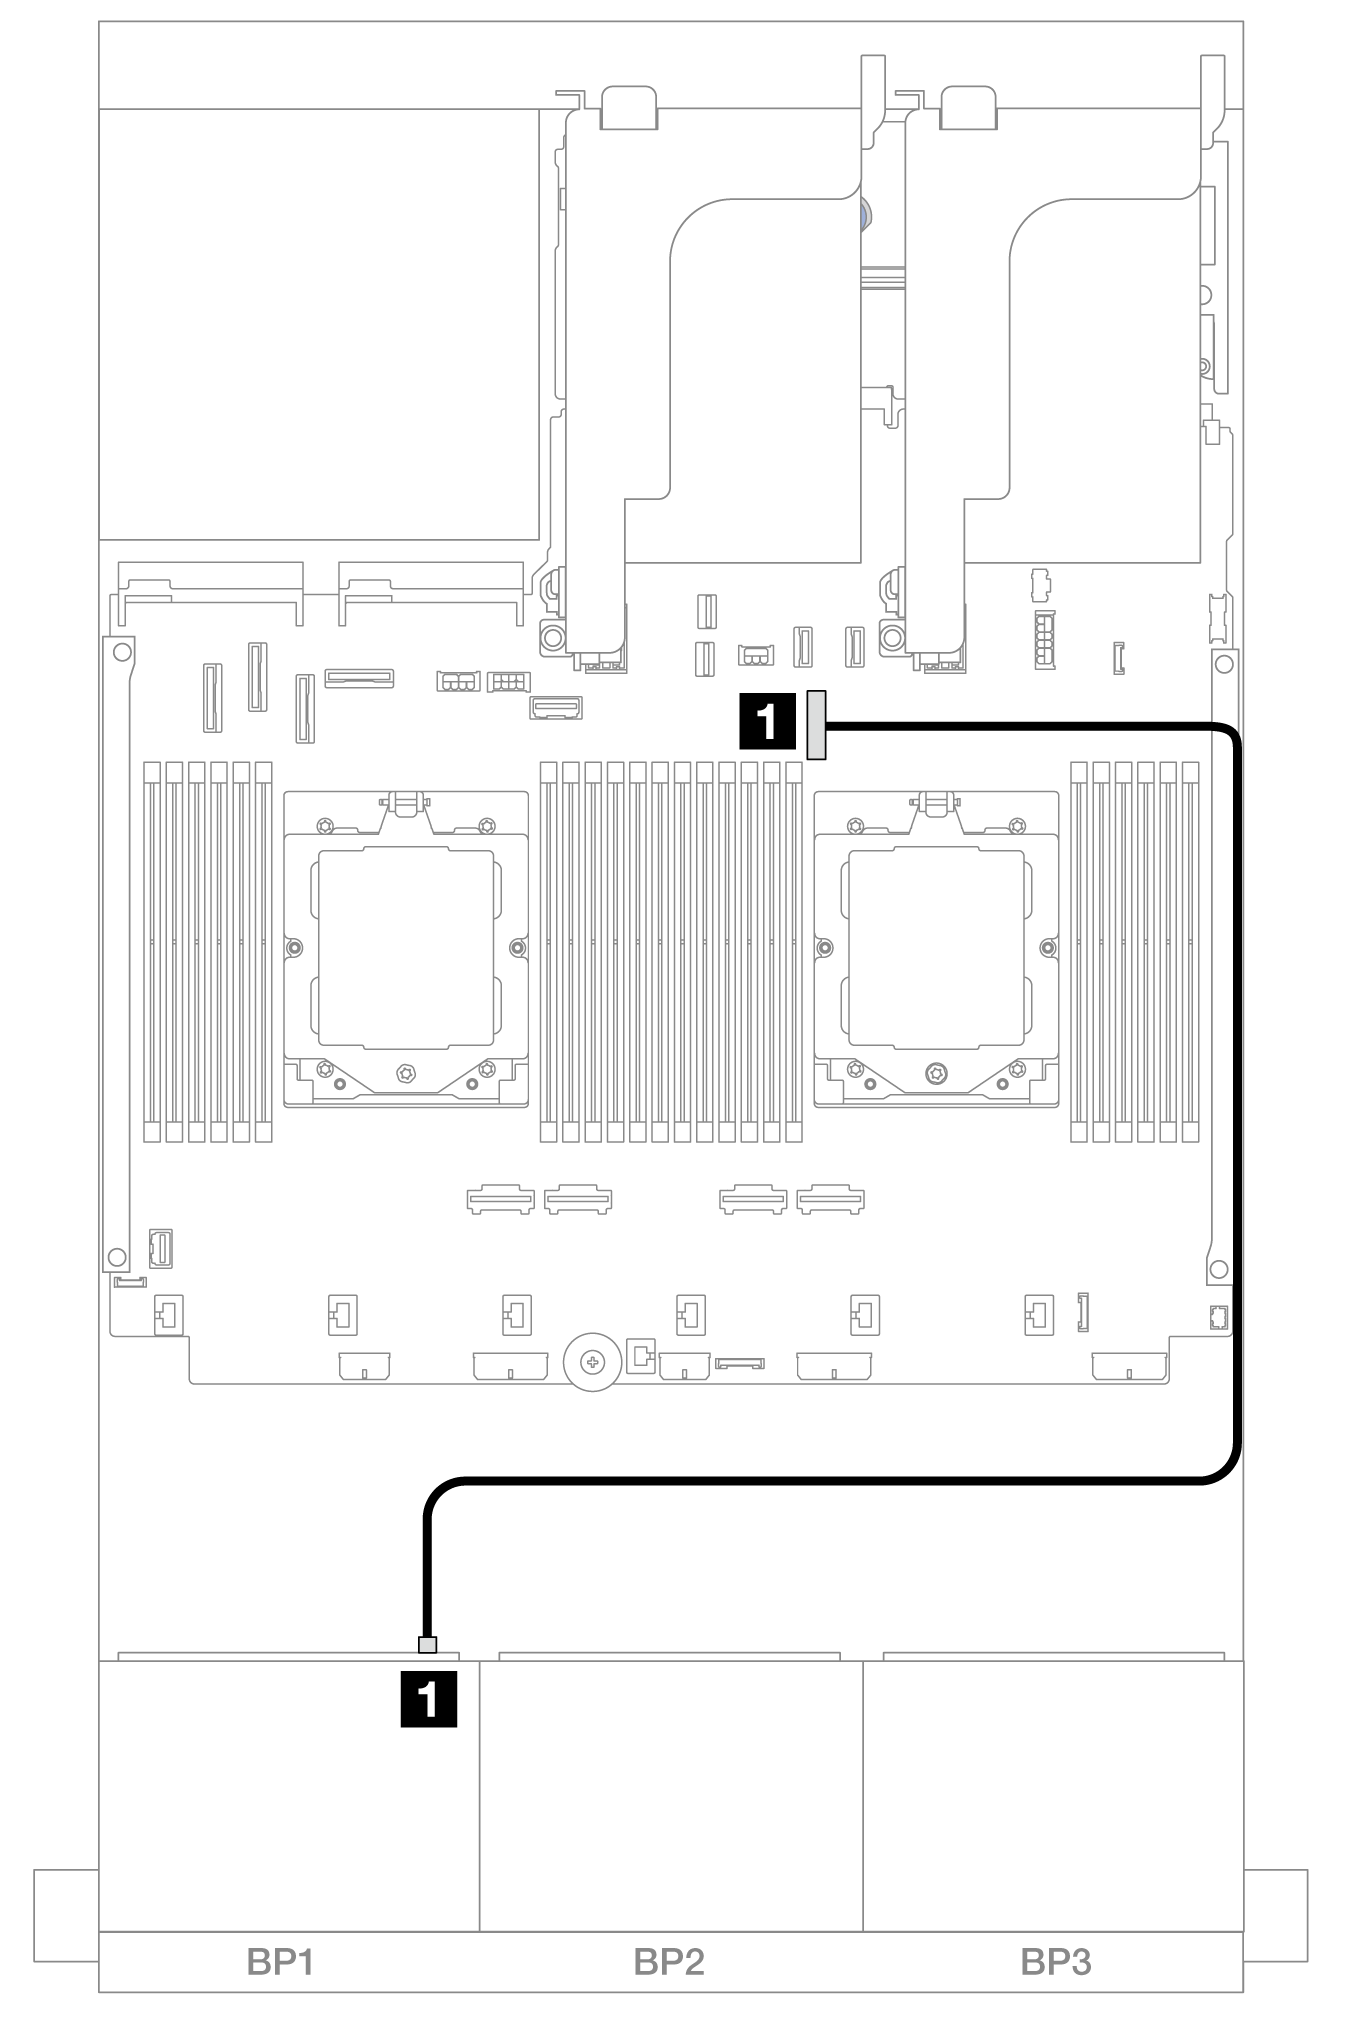 SAS/SATA cable routing to onboard connector